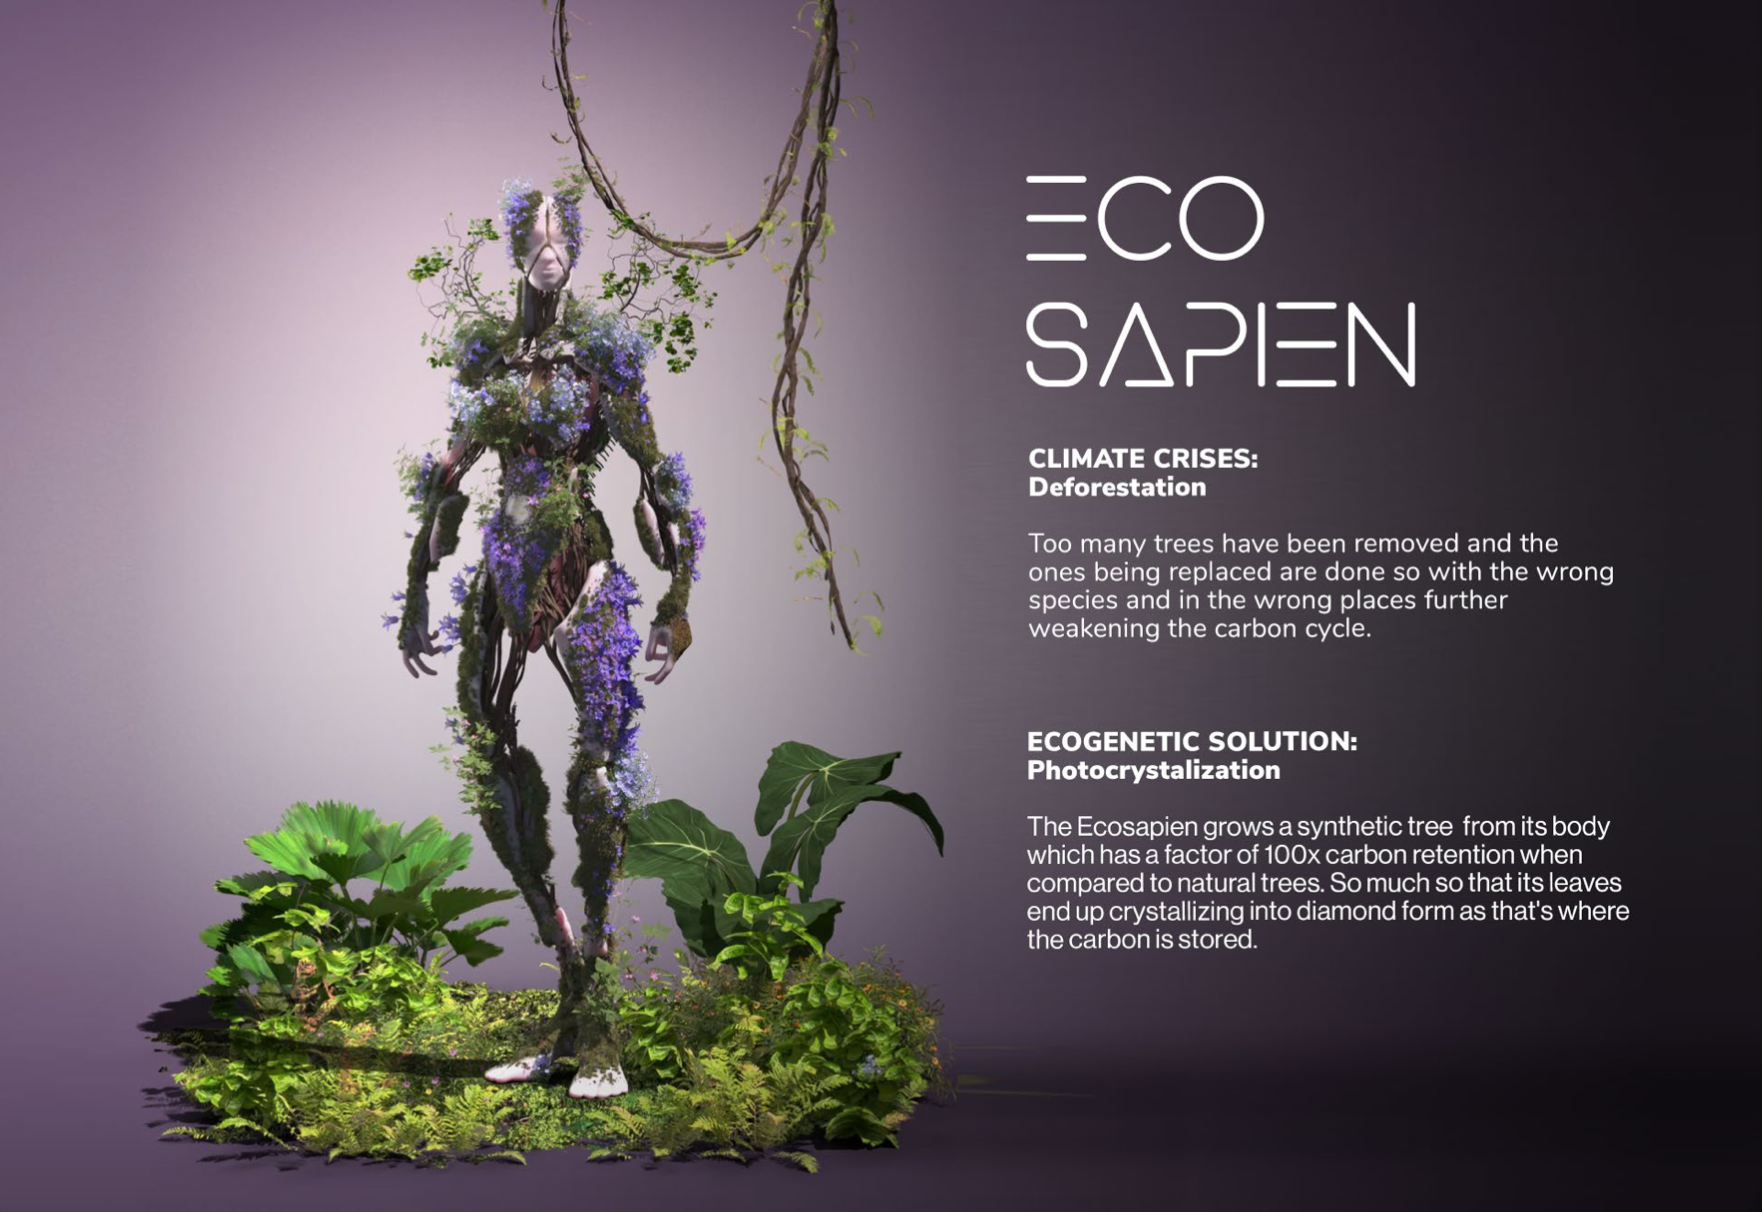 Meet Eco, she is the fearless leader of the Ecosapiens